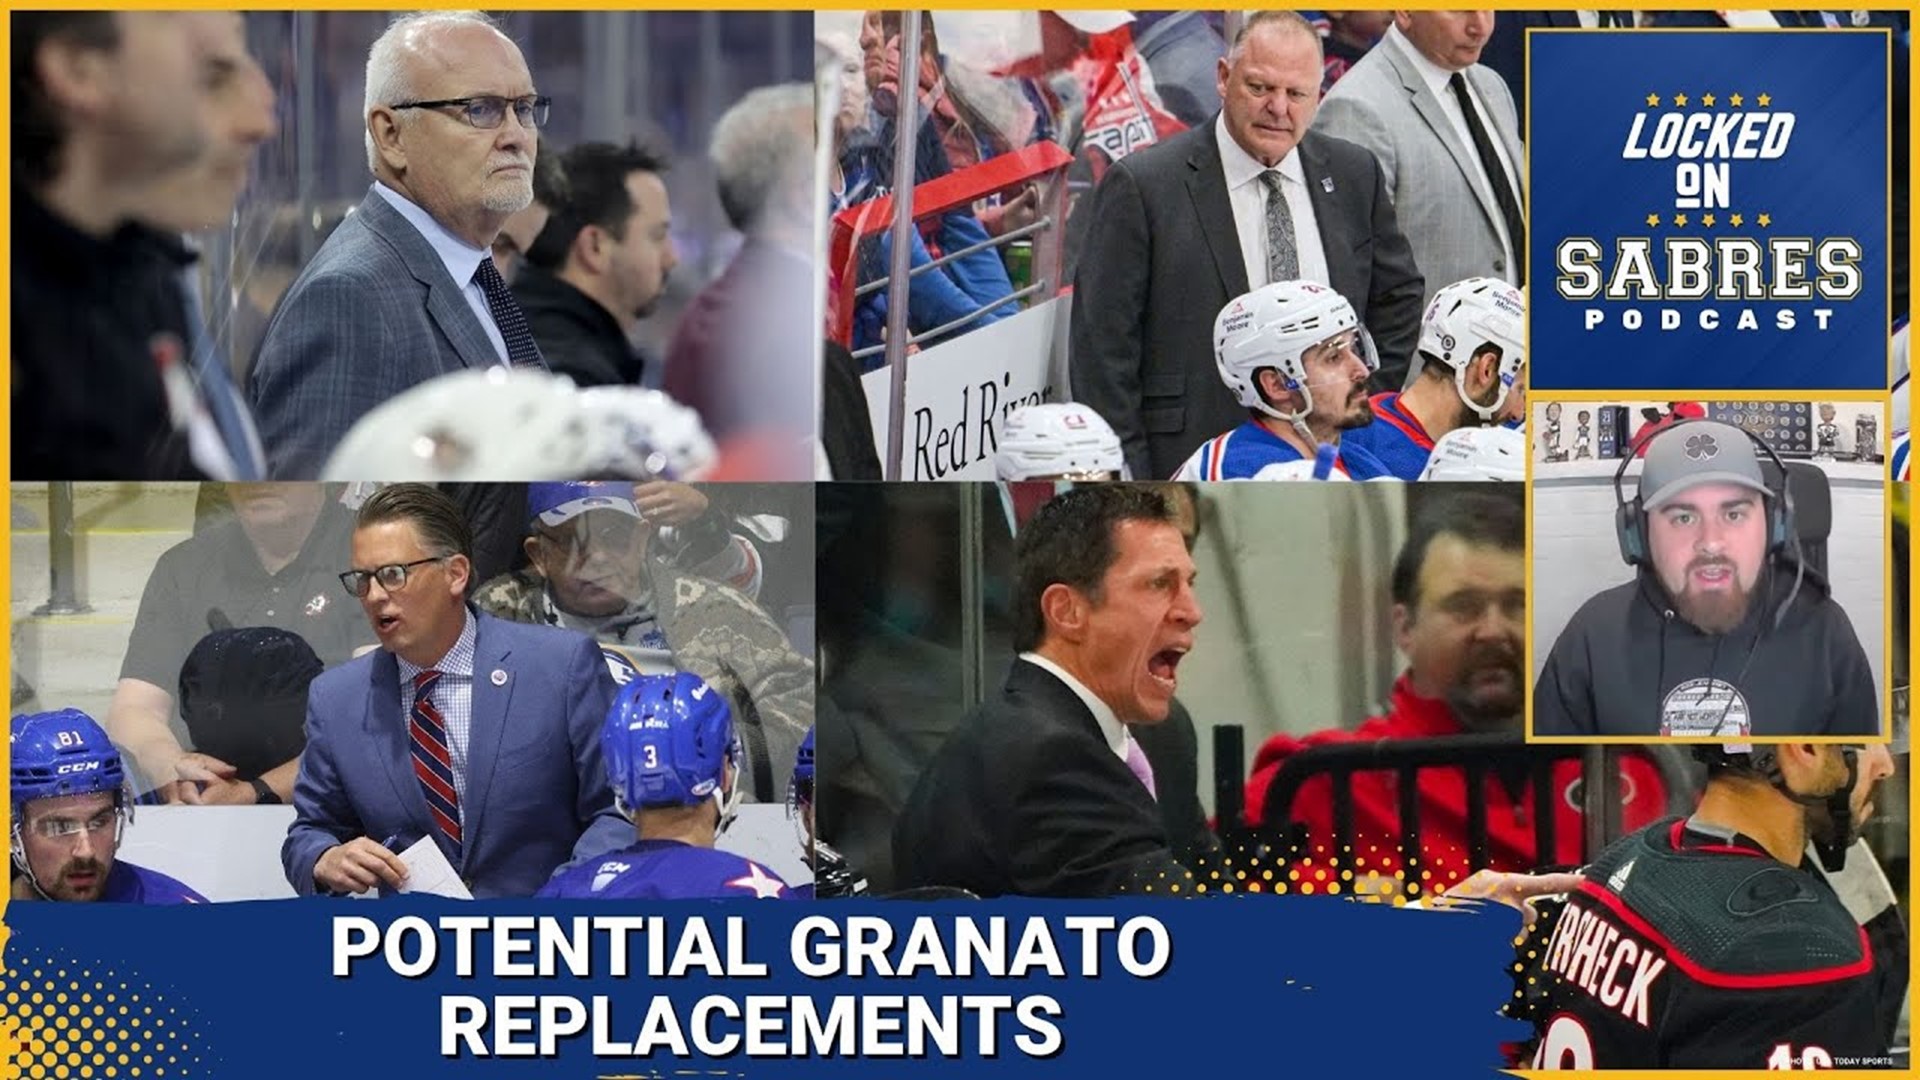 Head coach candidates to replace Don Granato, should the Sabres move on